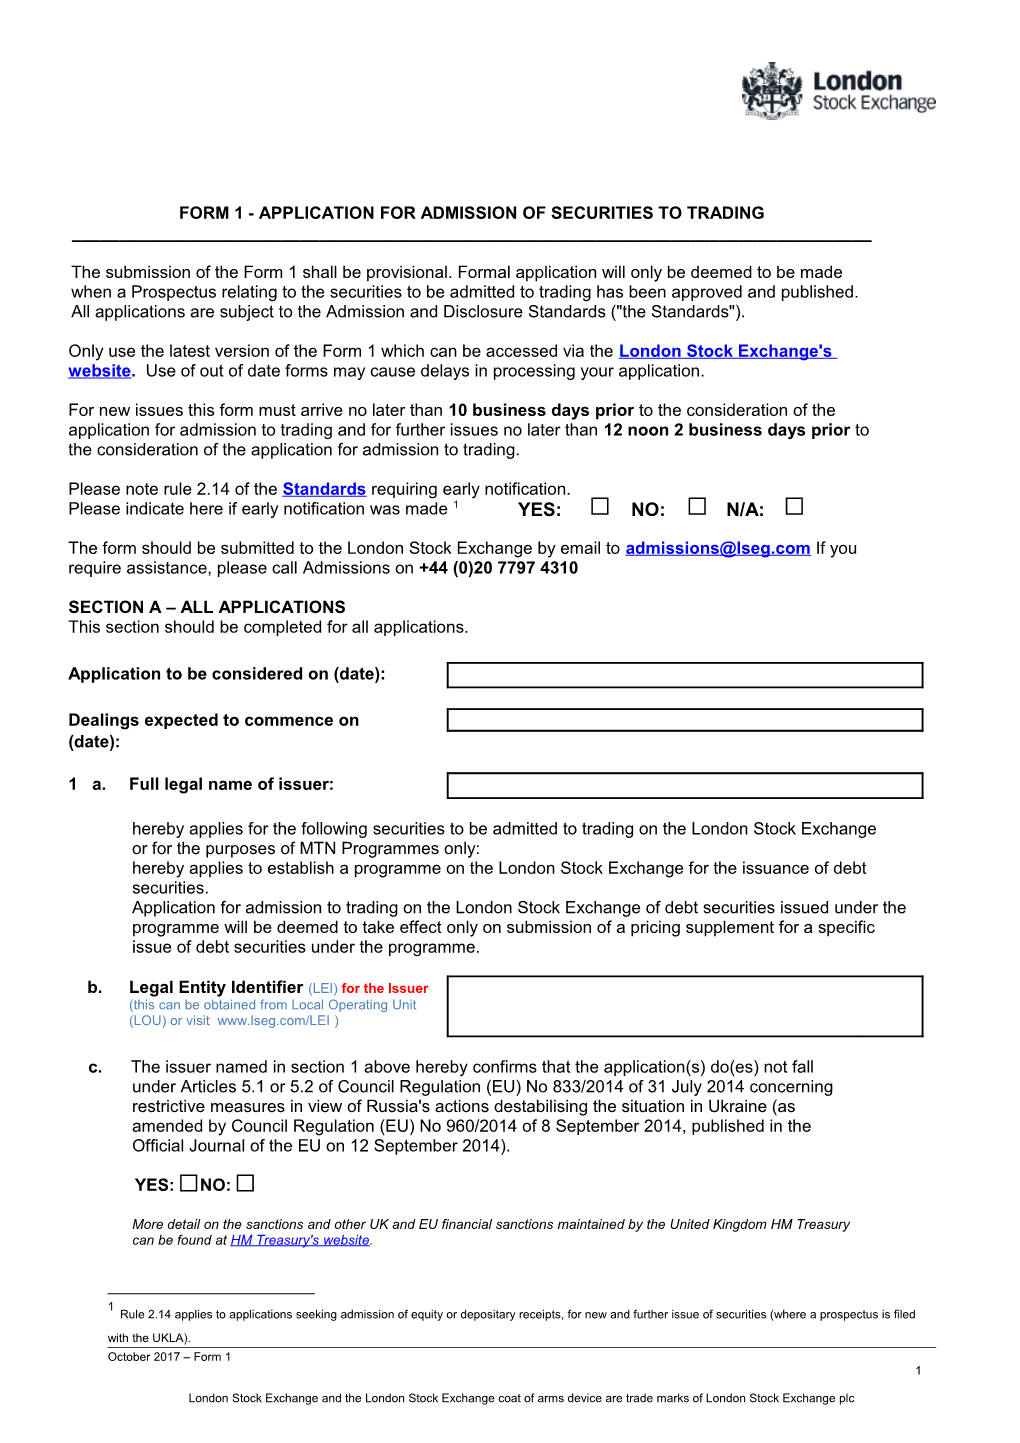 Form 1 - Application for Admission of Securities to Trading